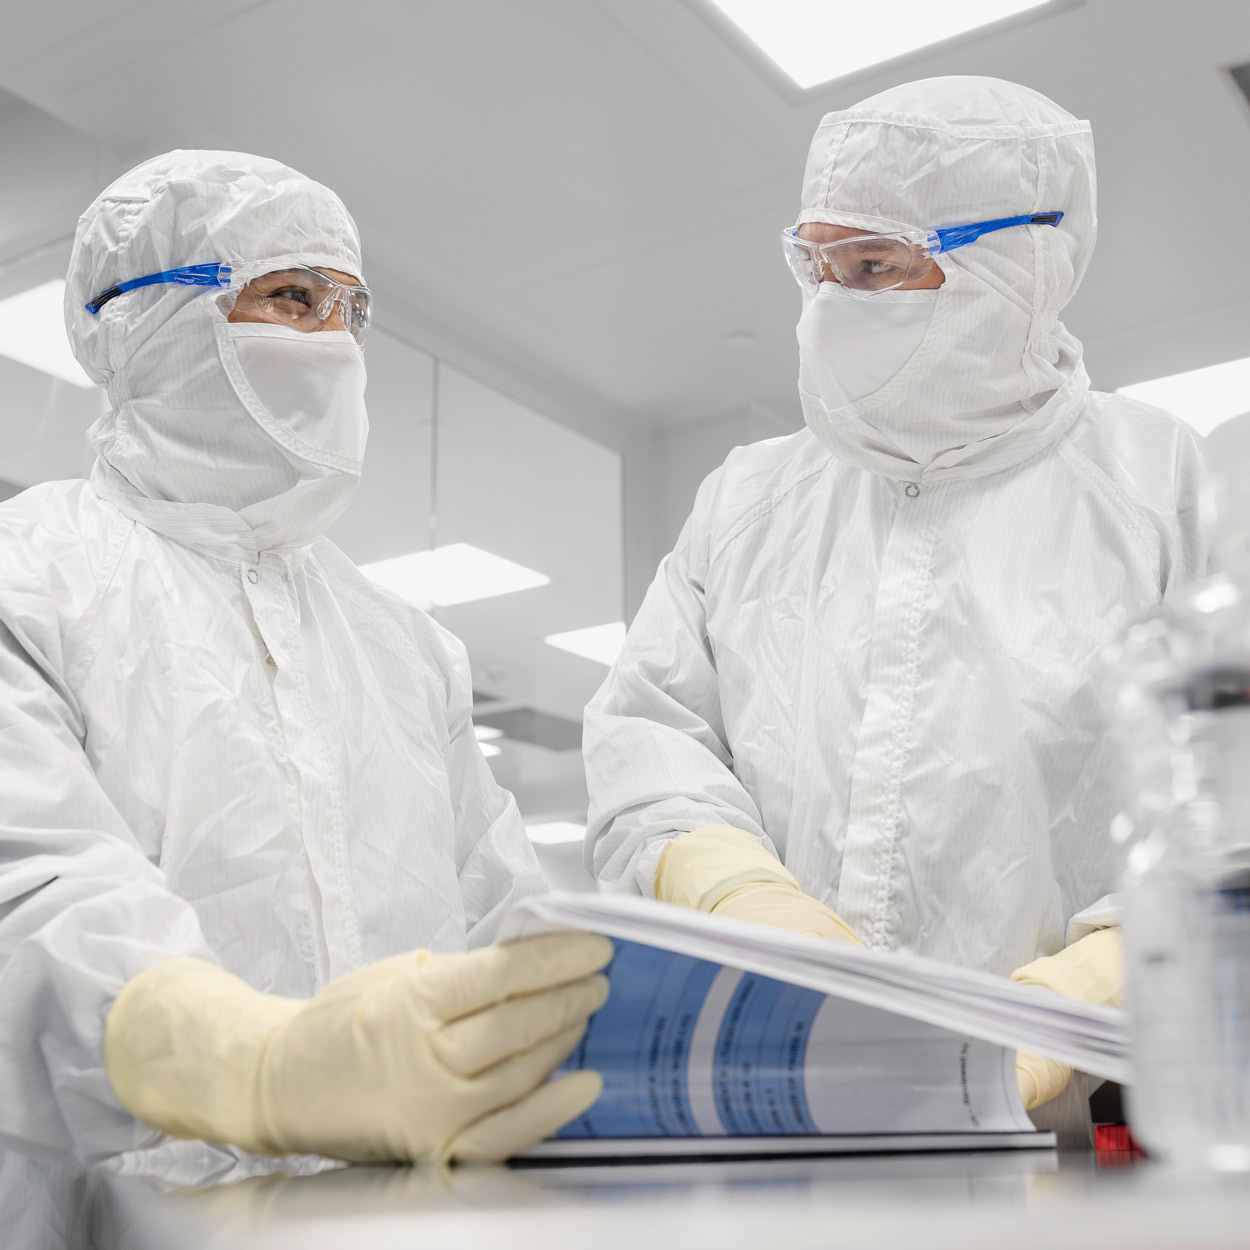 Two people in clean room attire looking over procedure sheets.